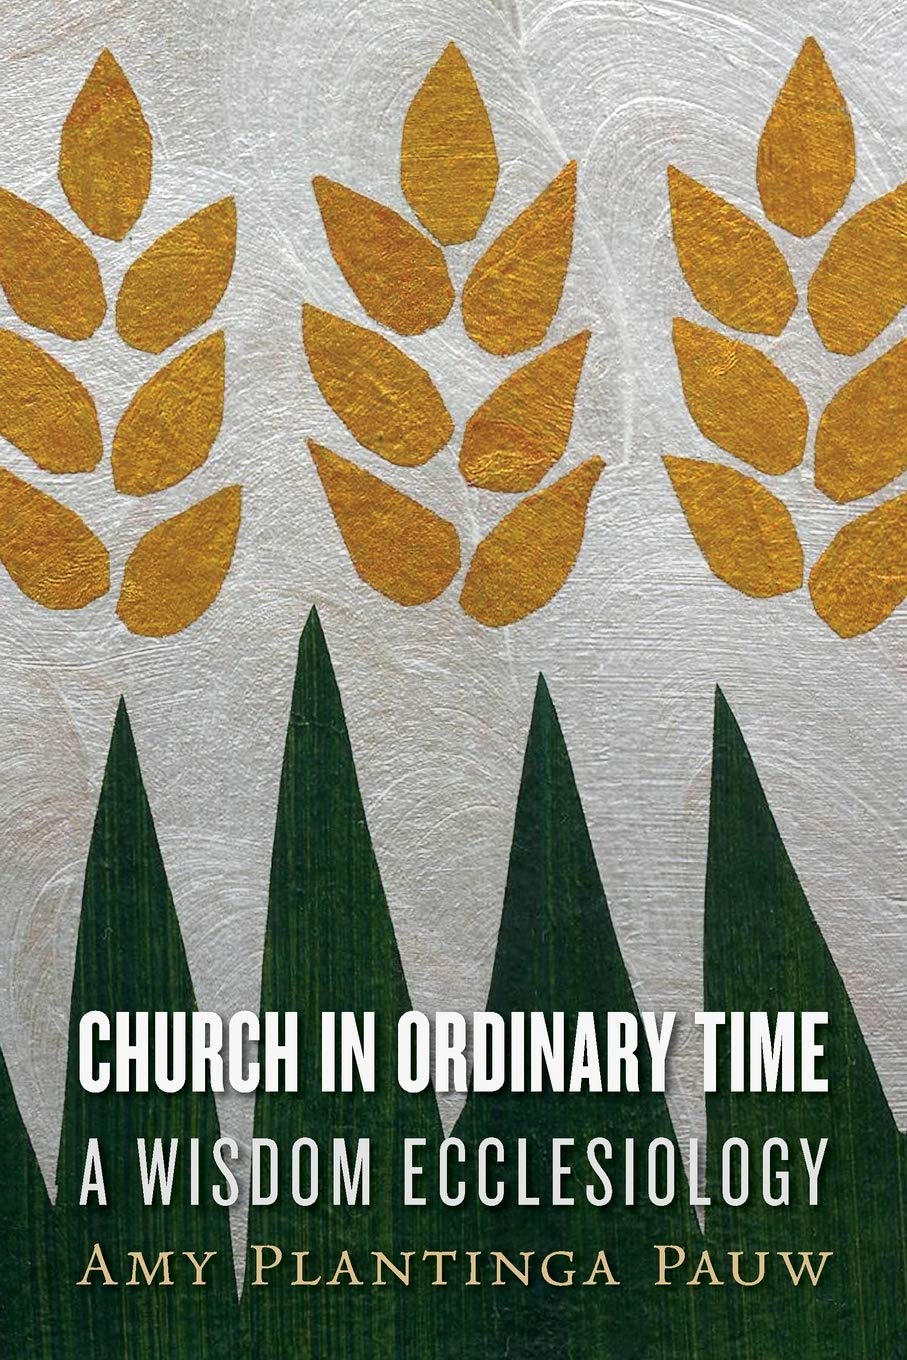 Book Cover - Church in Ordinary Time - A Wisdom Ecclesiology